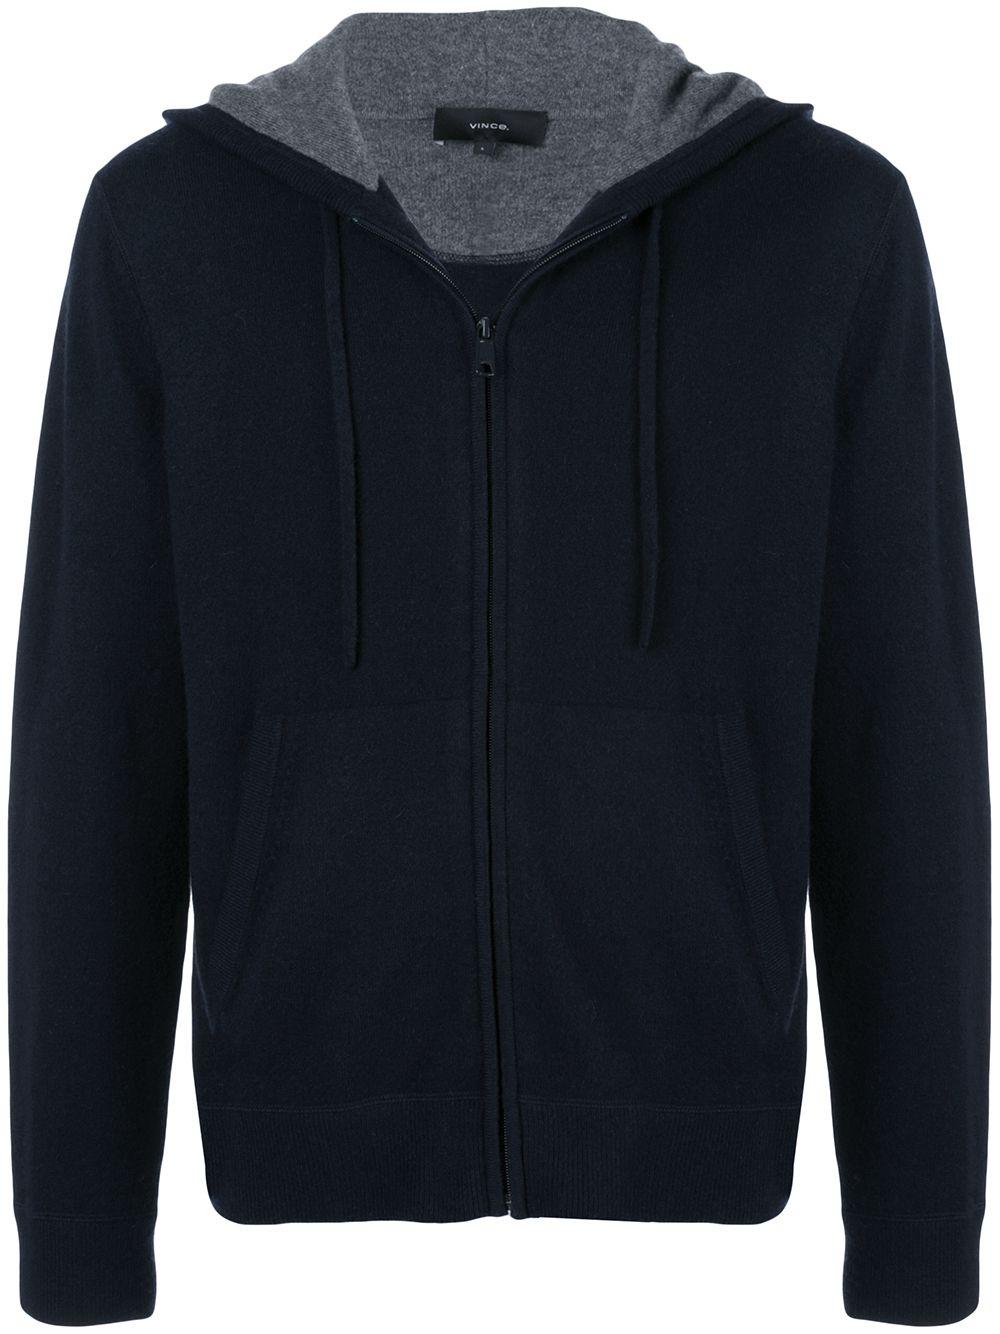 Vince Cashmere Zip-up Hoodie in Blue for Men - Lyst